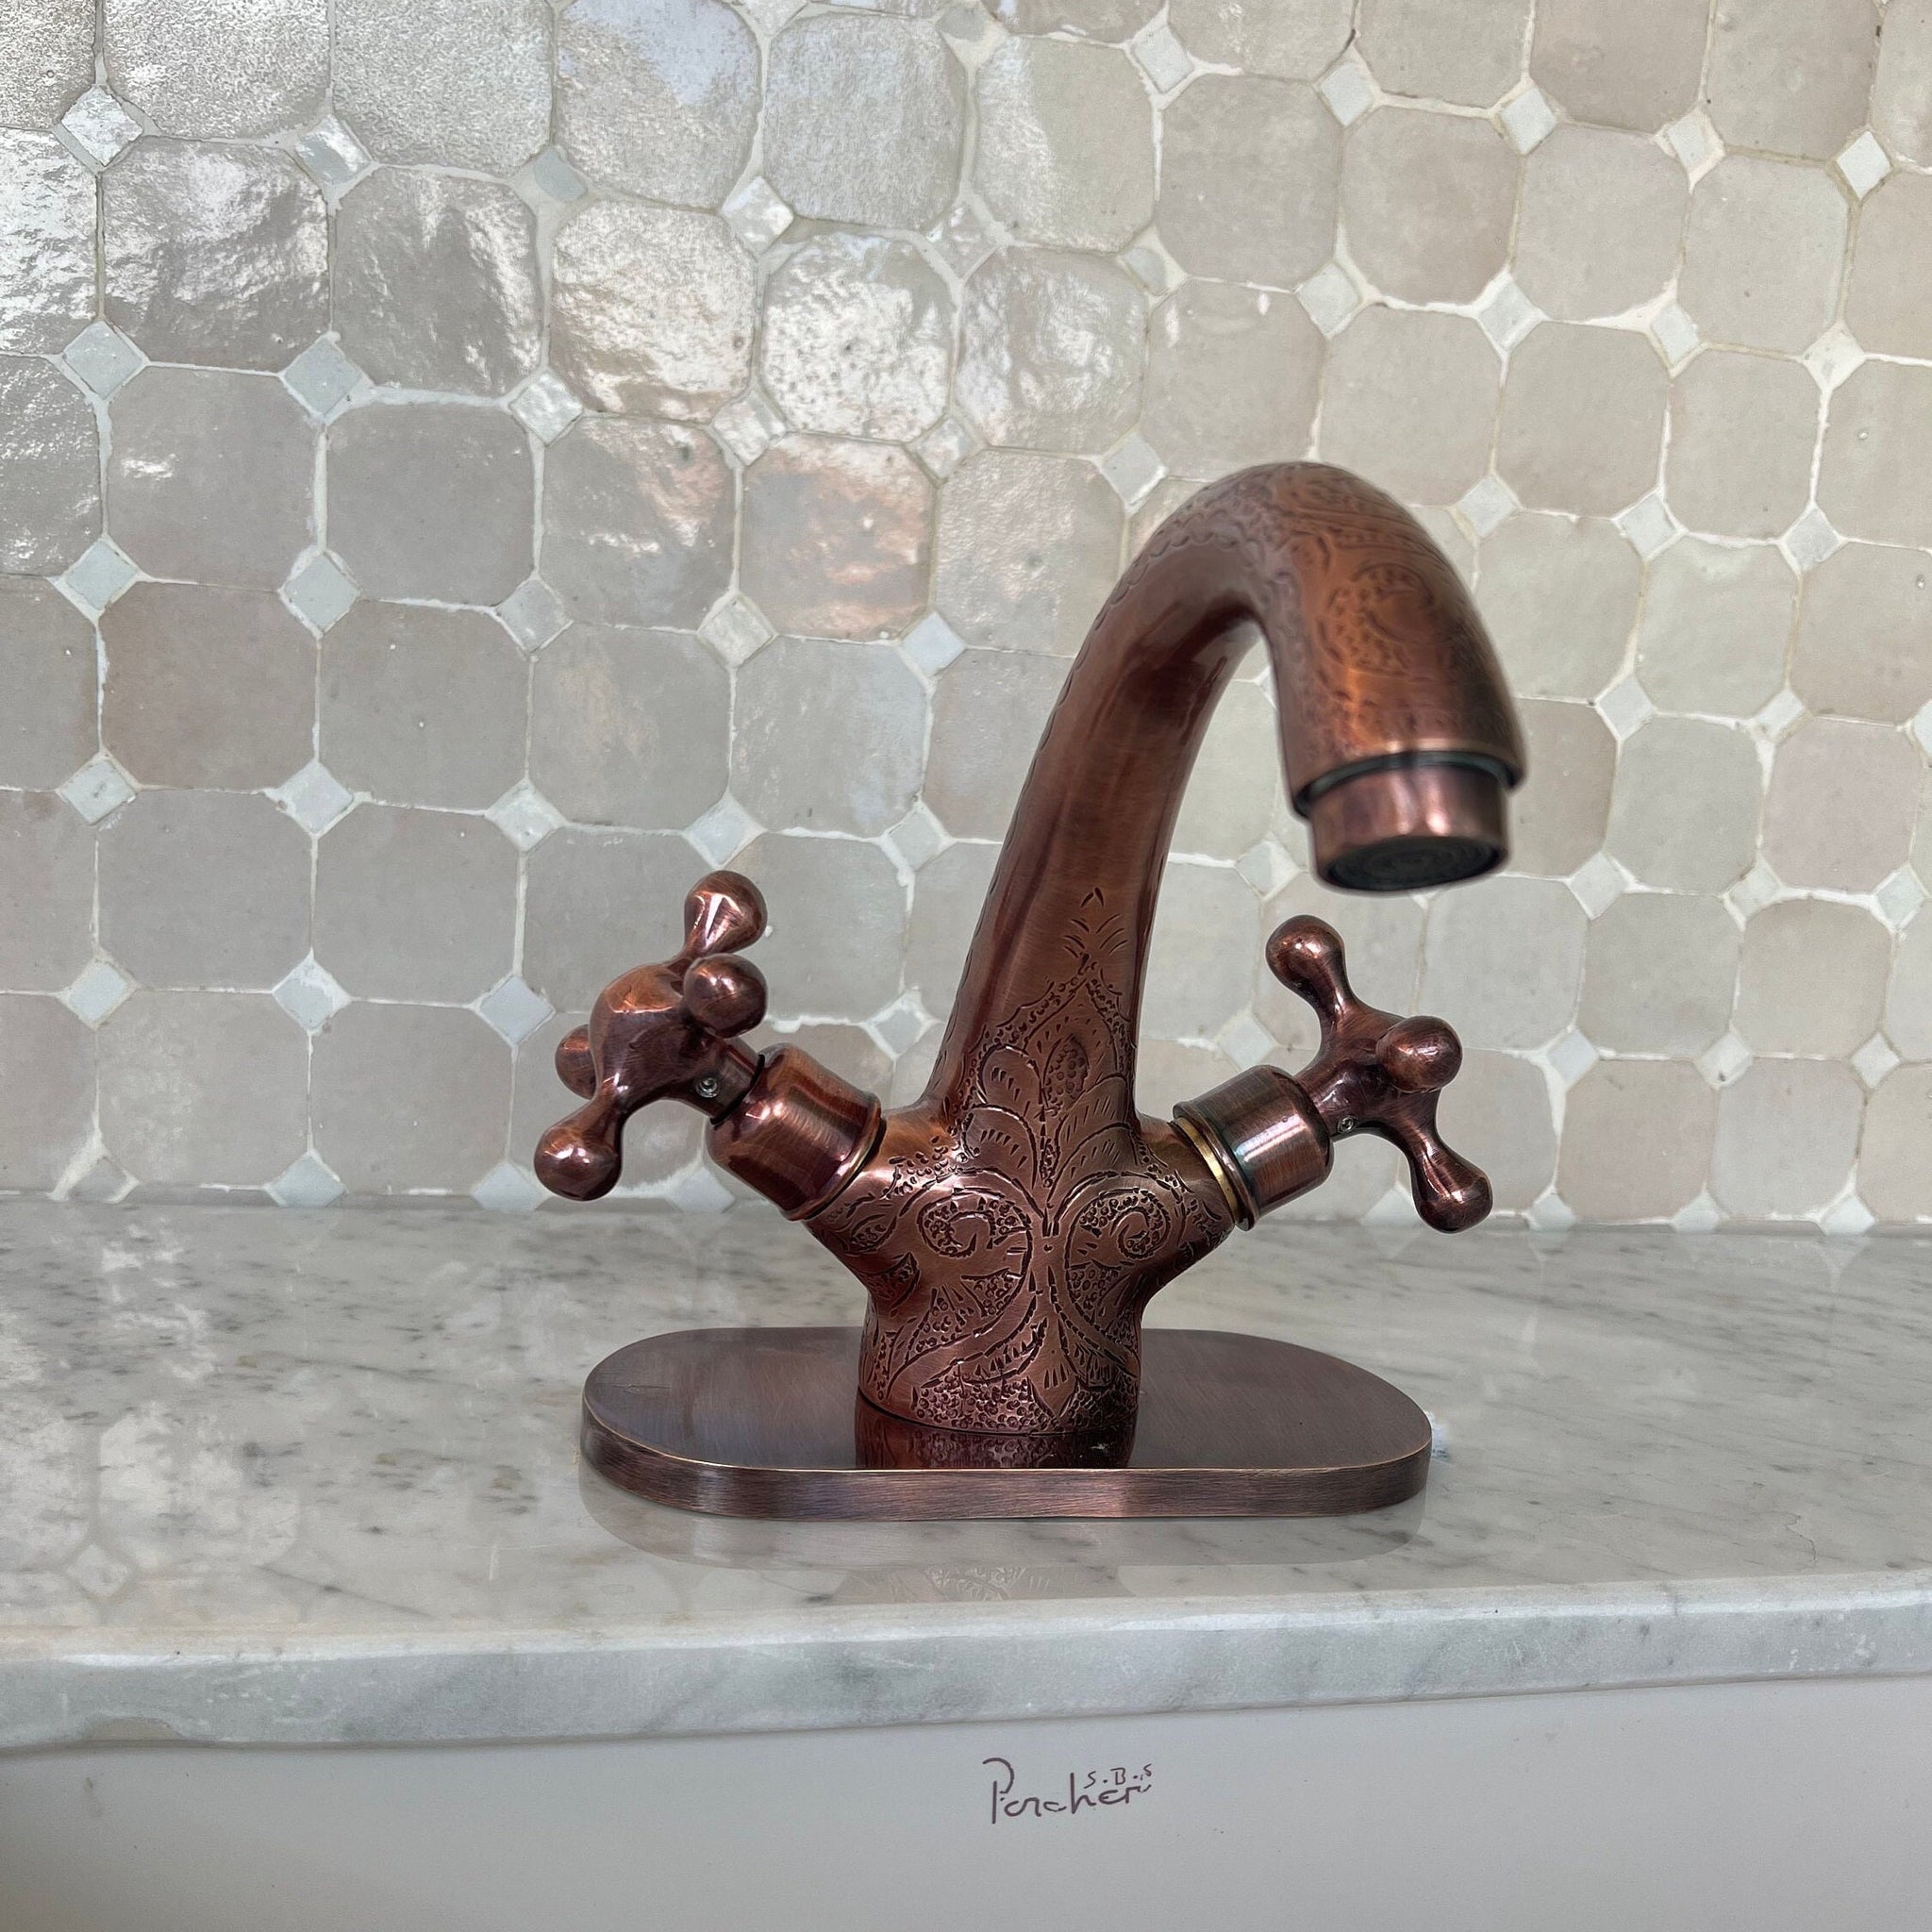 Solid Brass Single Hole Faucet With Baseplate - Copper faucet Finish and Moroccan Decoration